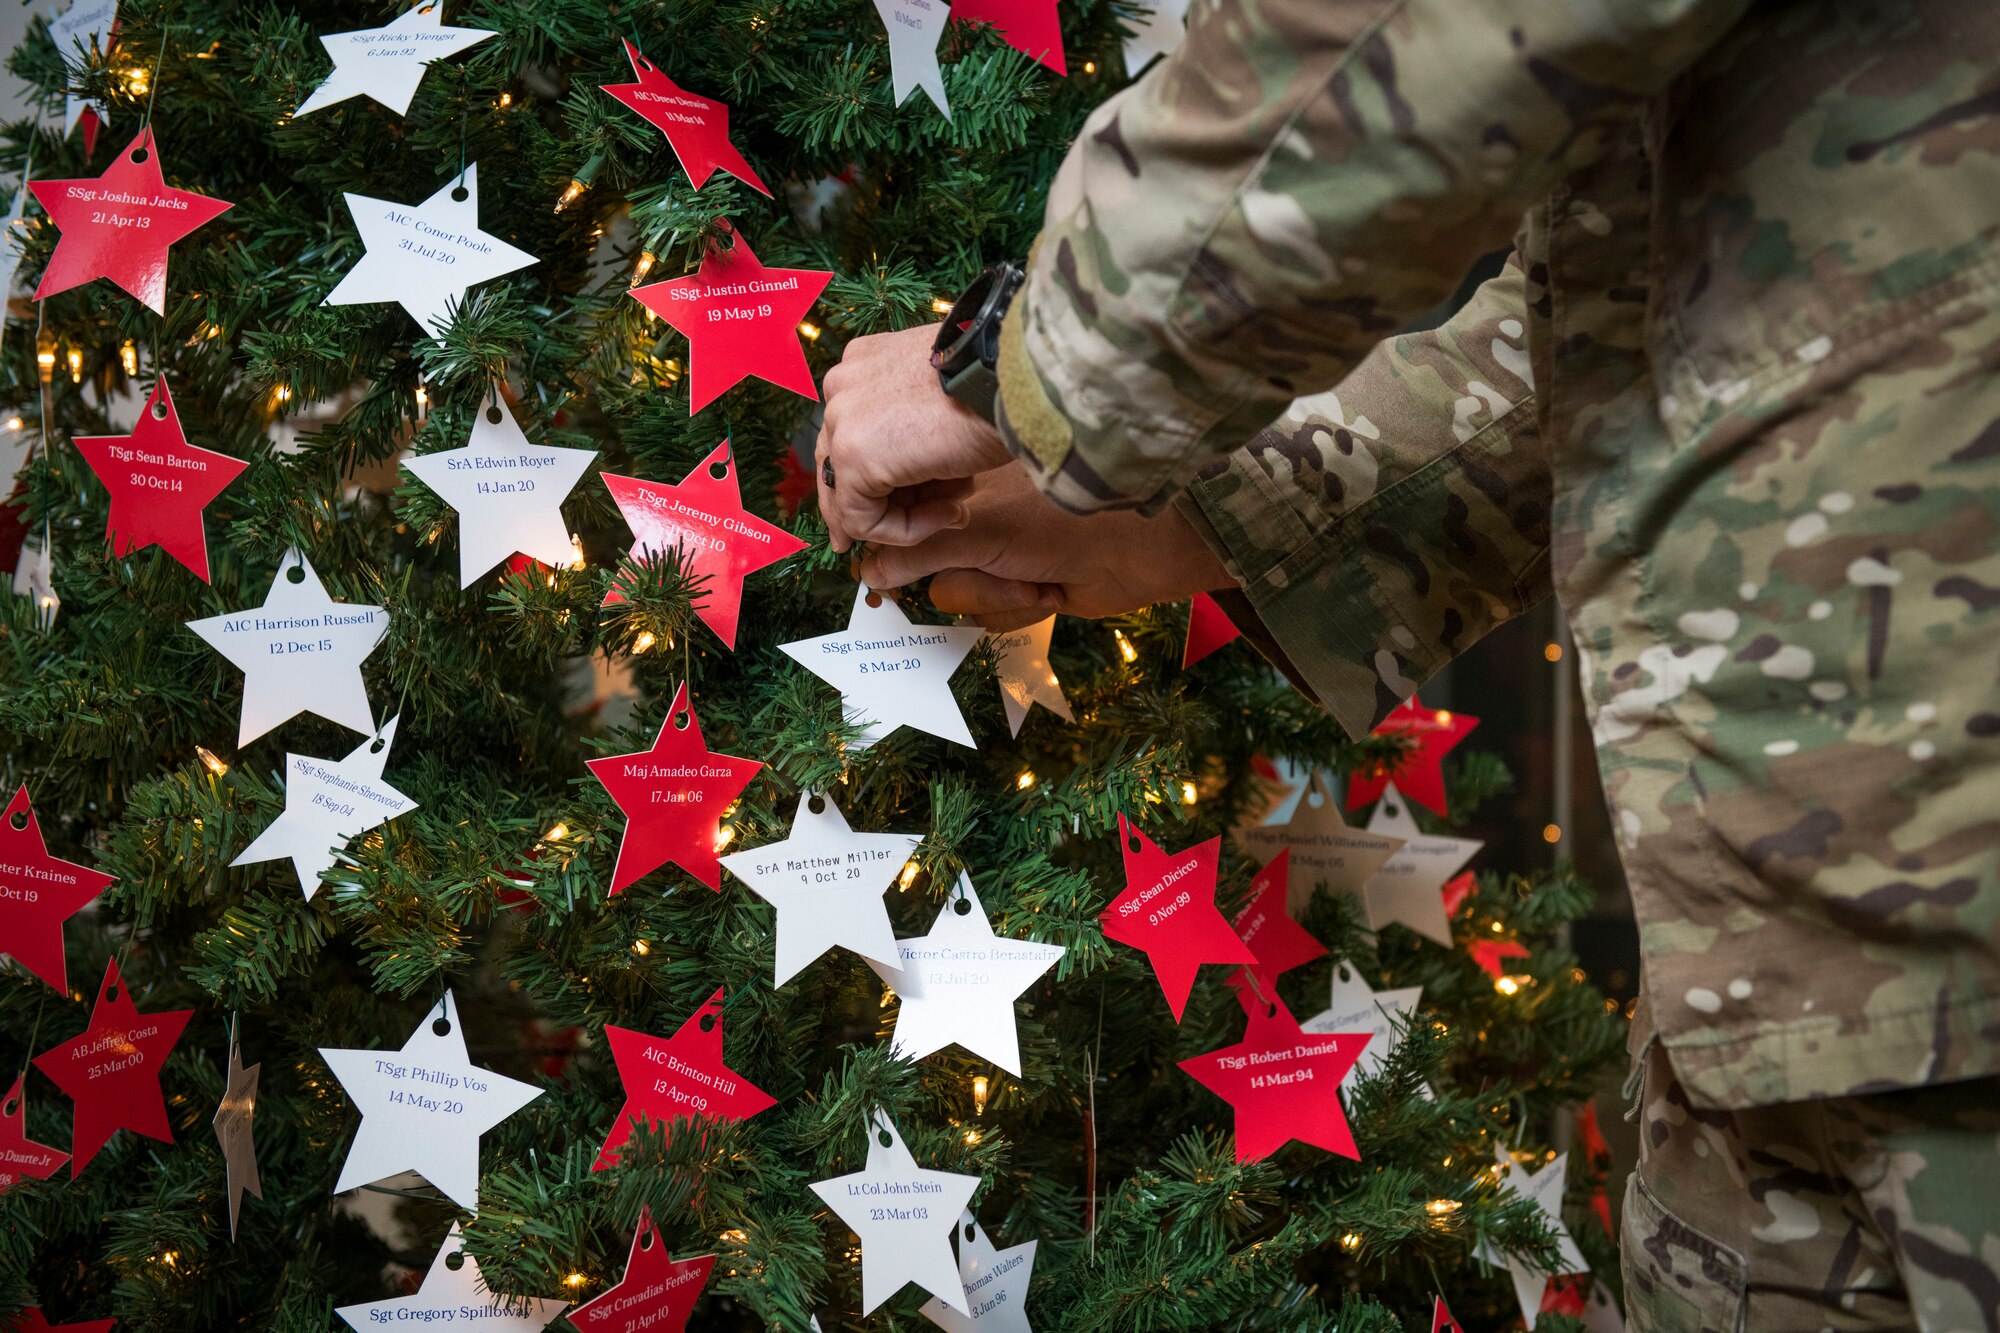 U.S. Air Force Col. Matthew Allen, commander of the 24th Special Operations Wing, places a star on an Honor Tree